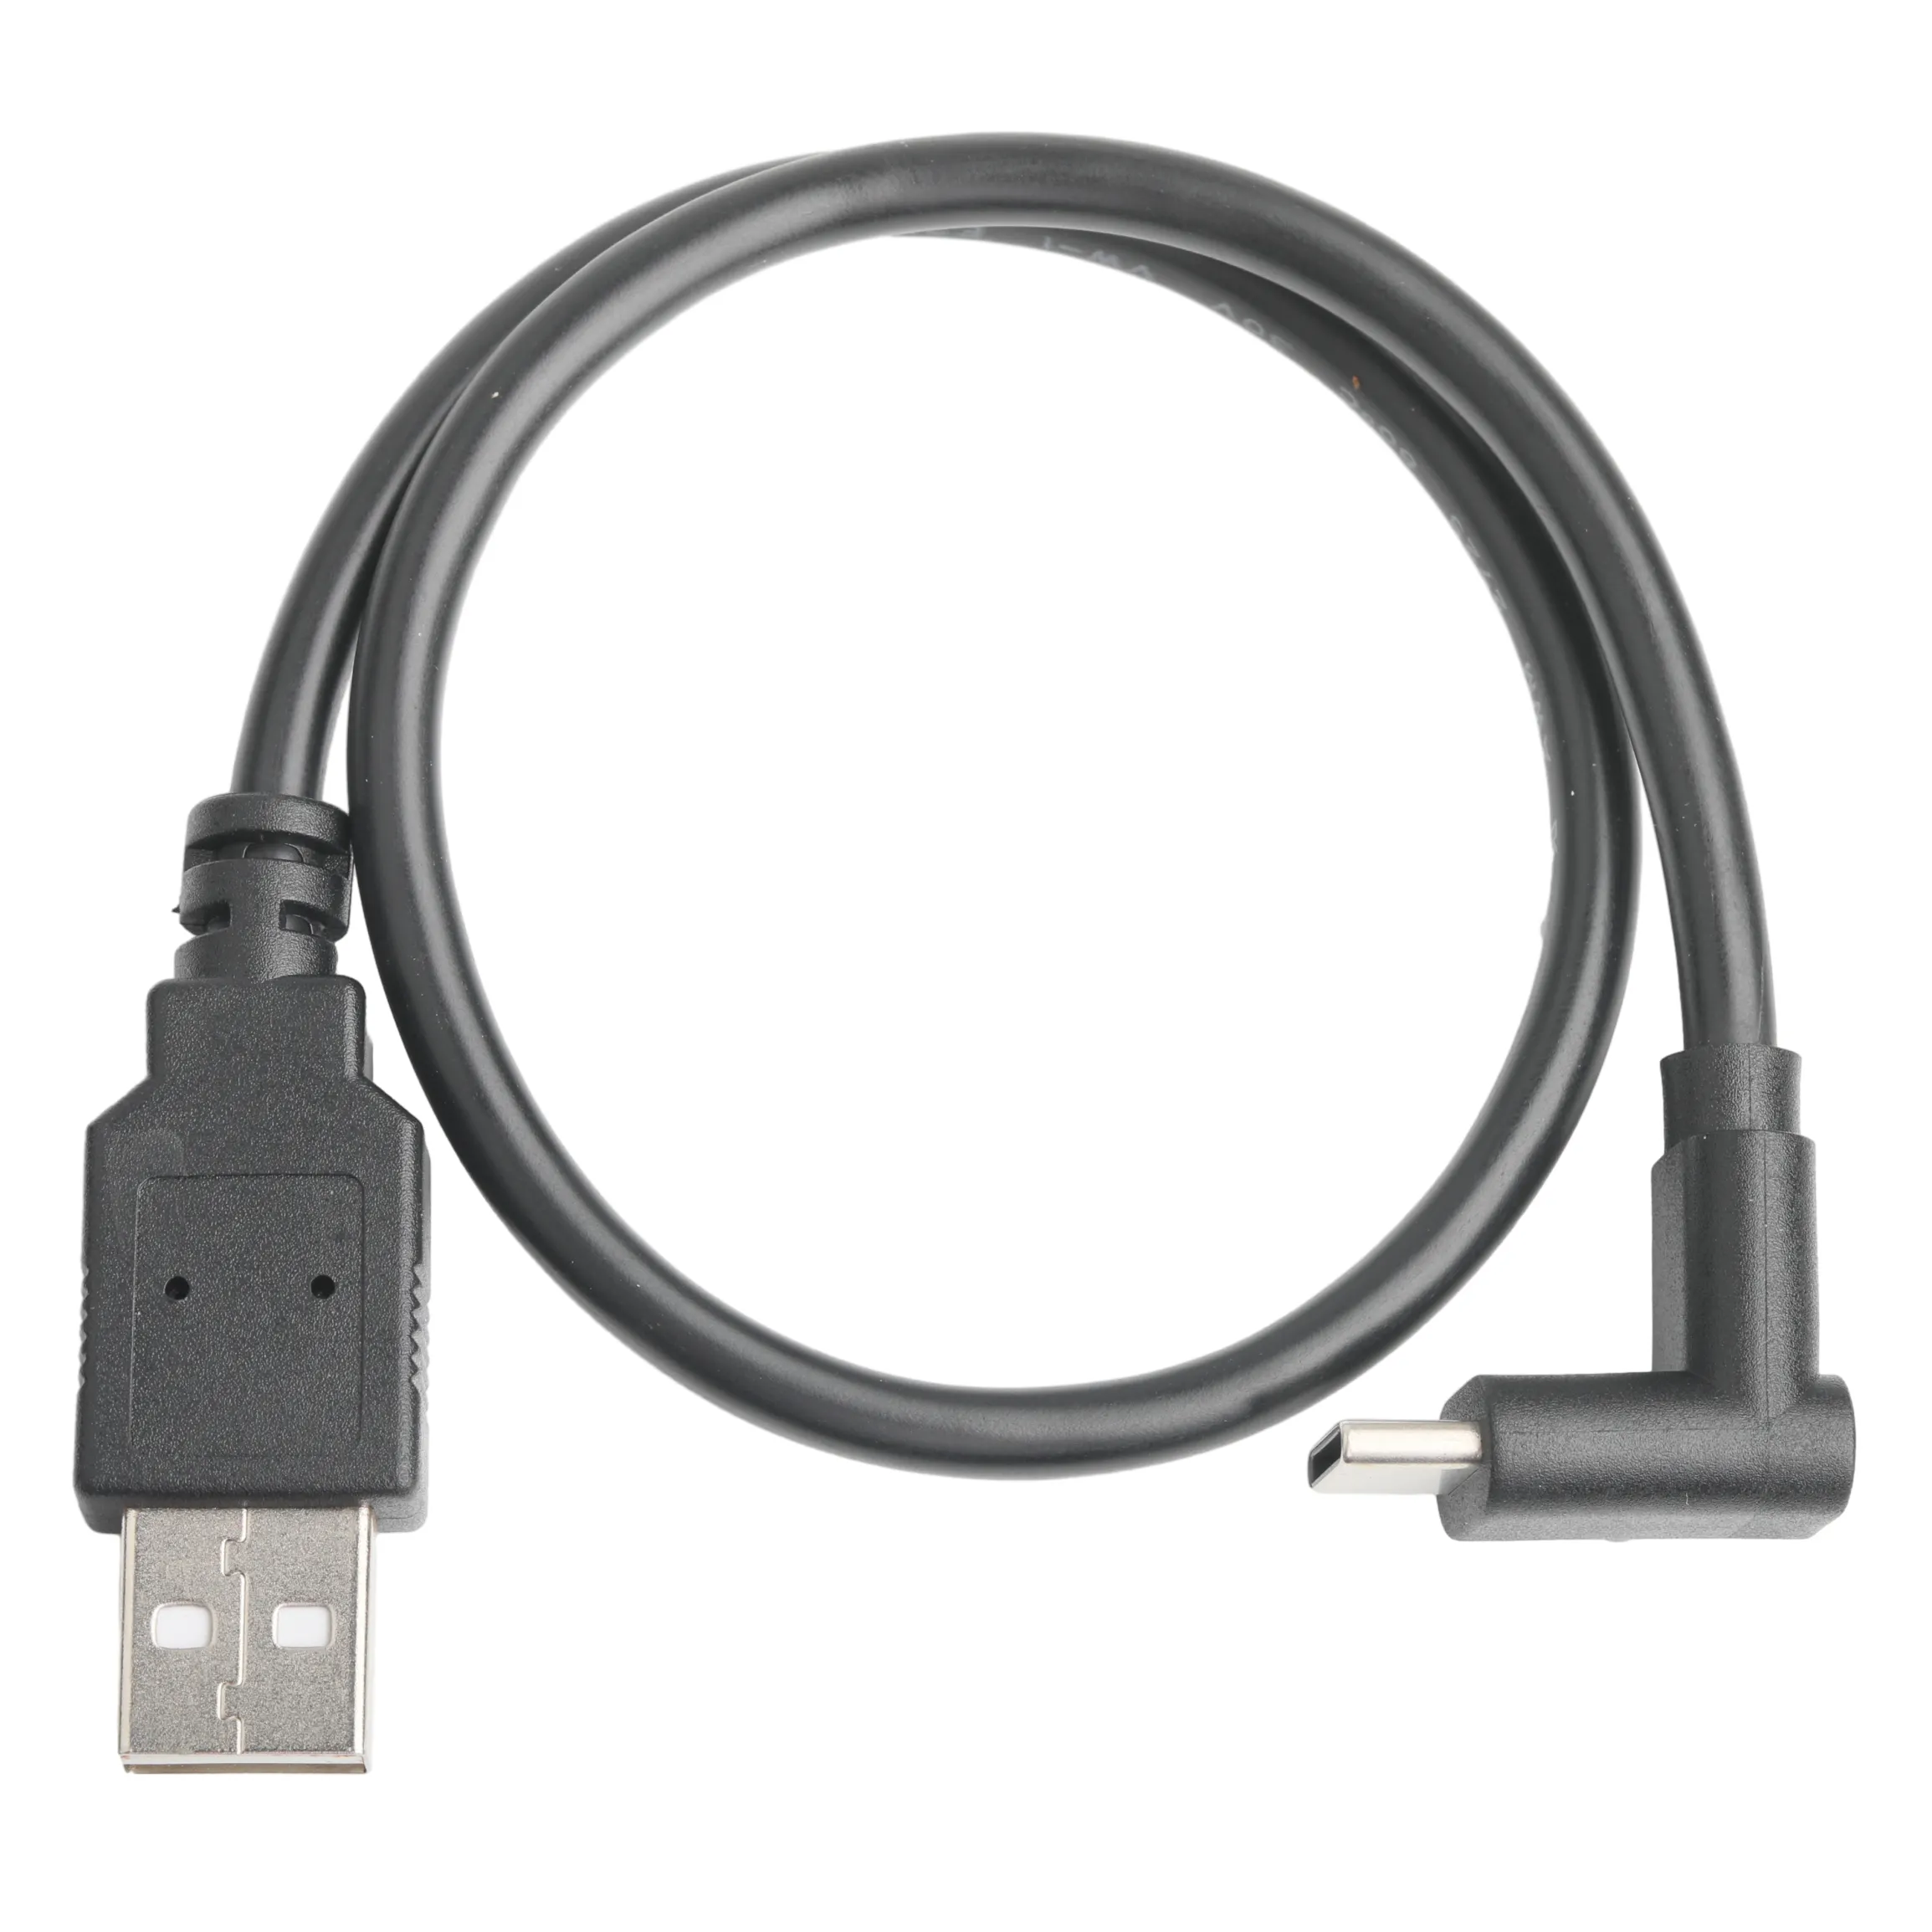 USB 2.0 cable USB data transfer charging cable TYPE-C interface high speed, suitable for all kinds of electronic devices